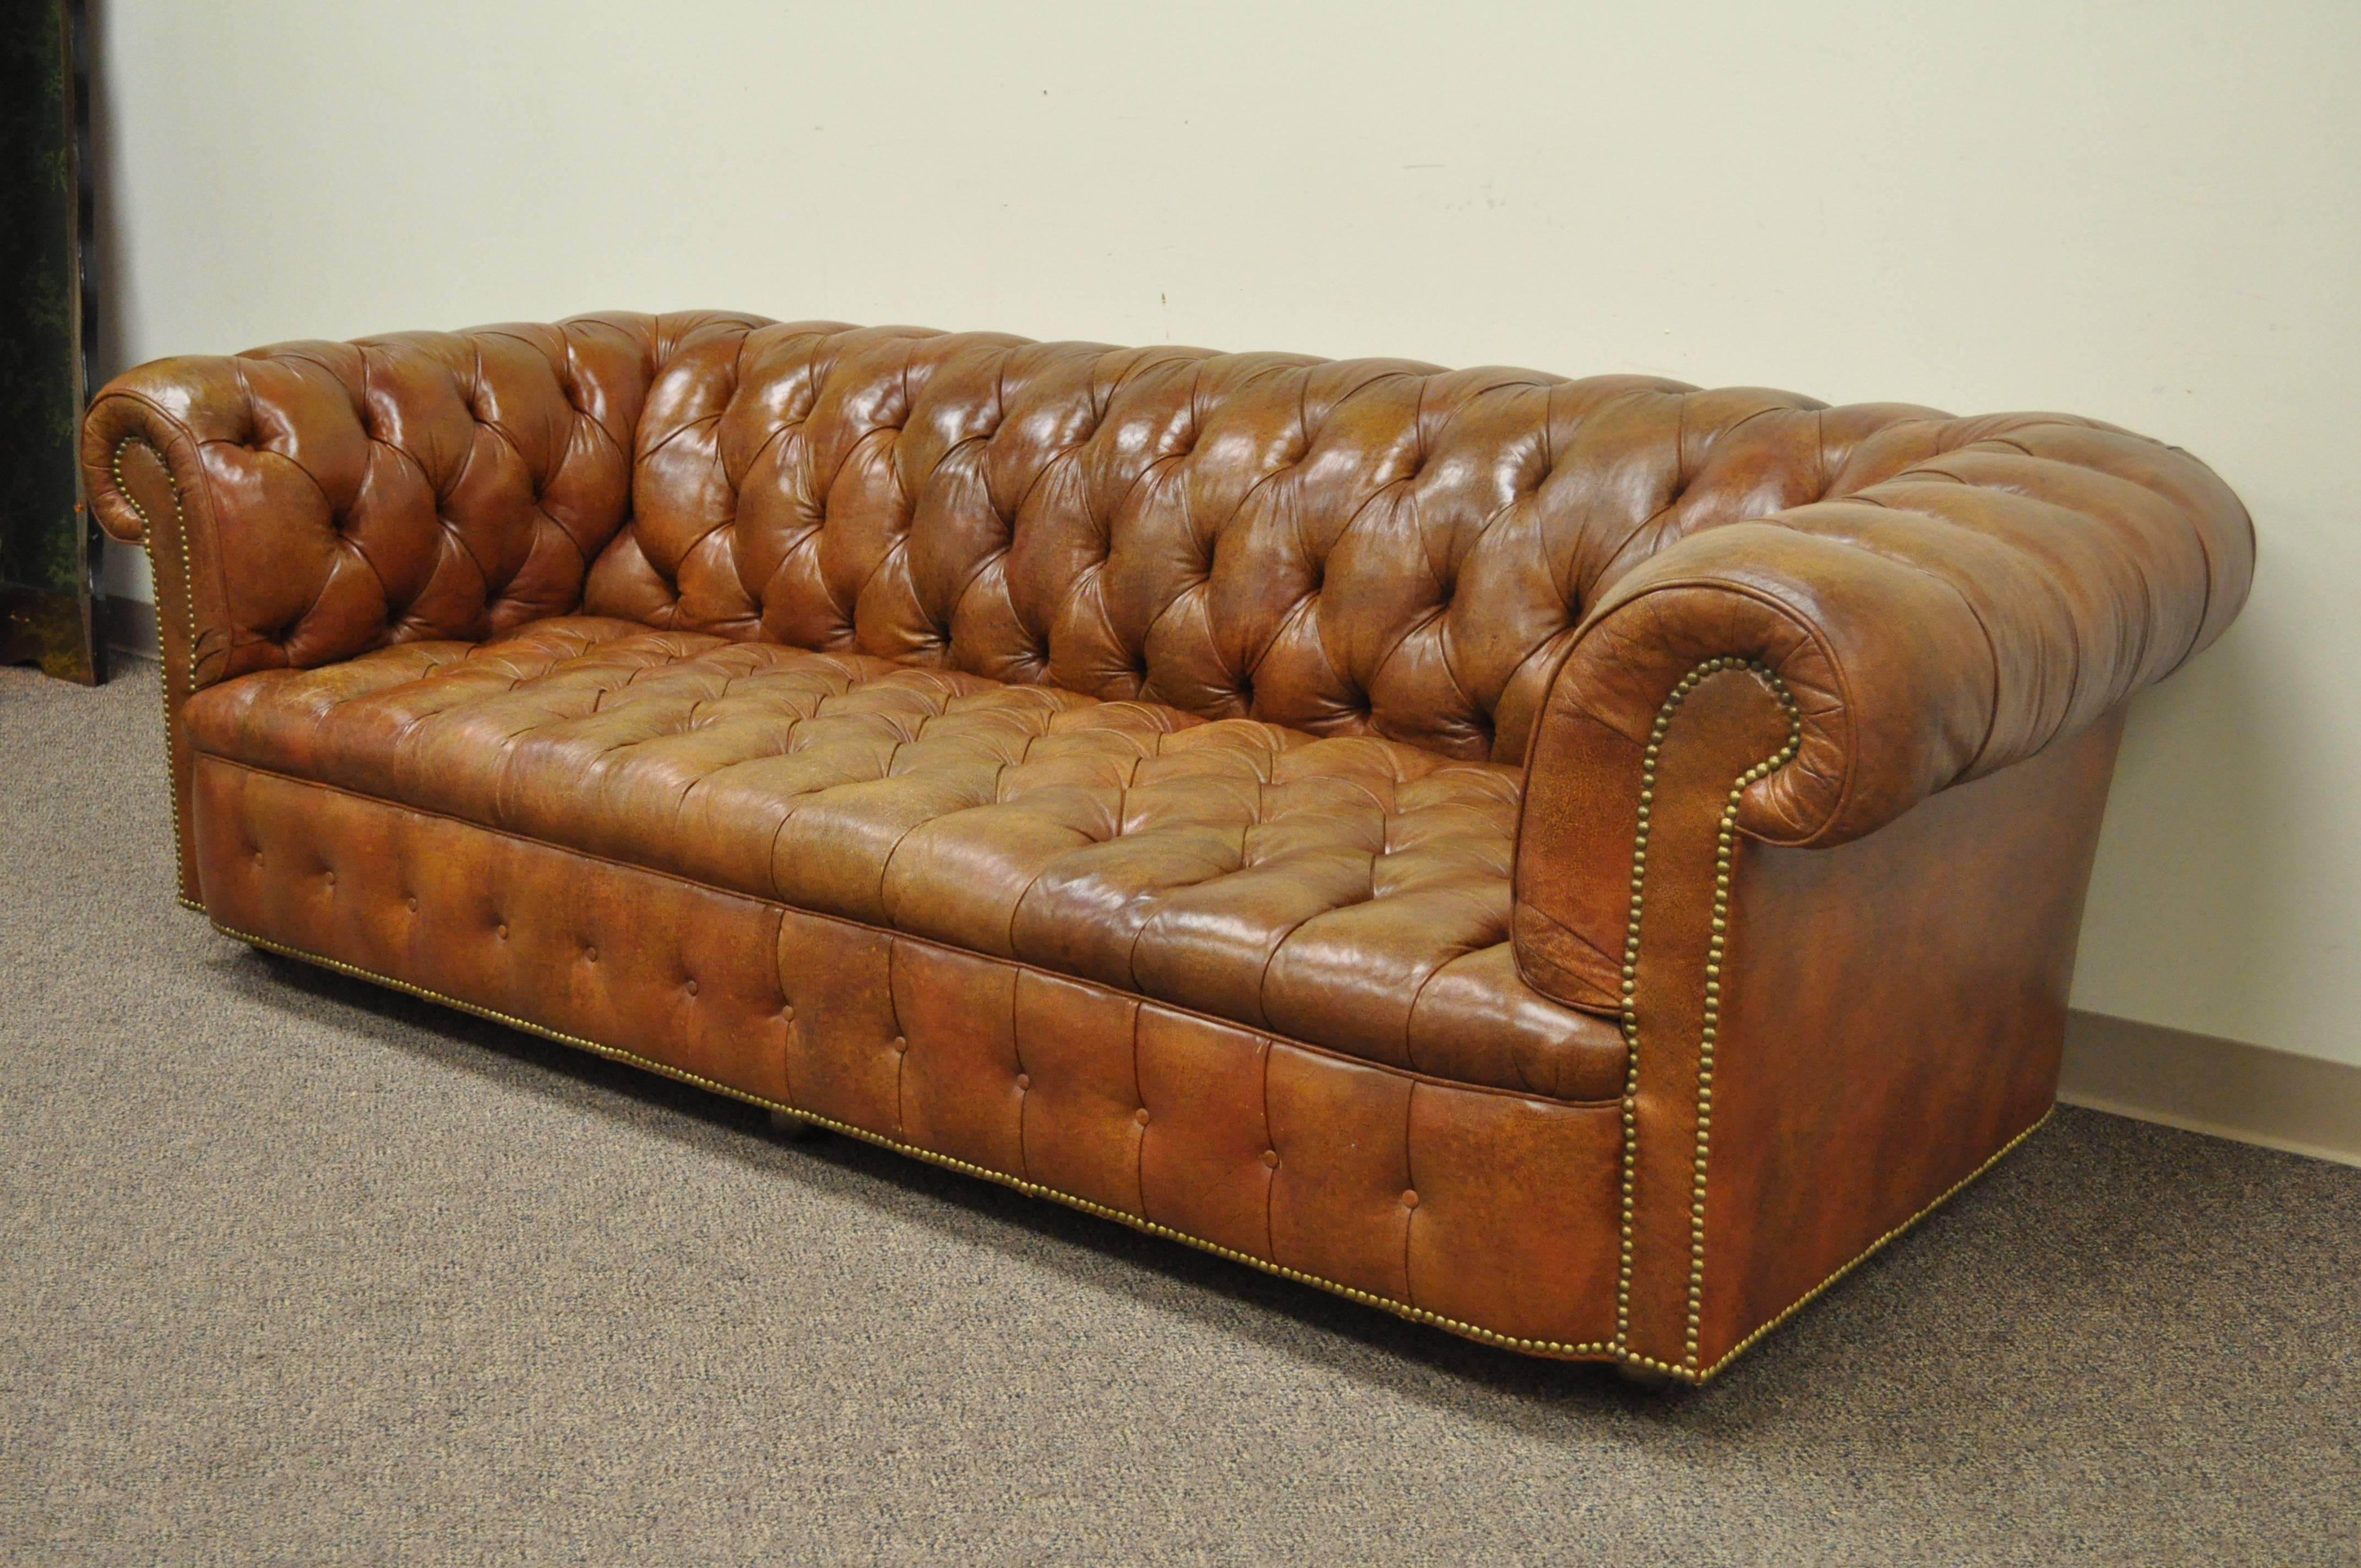 Vintage rolled arm English style button tufted brown leather chesterfield sofa by Henredon on rolling casters.